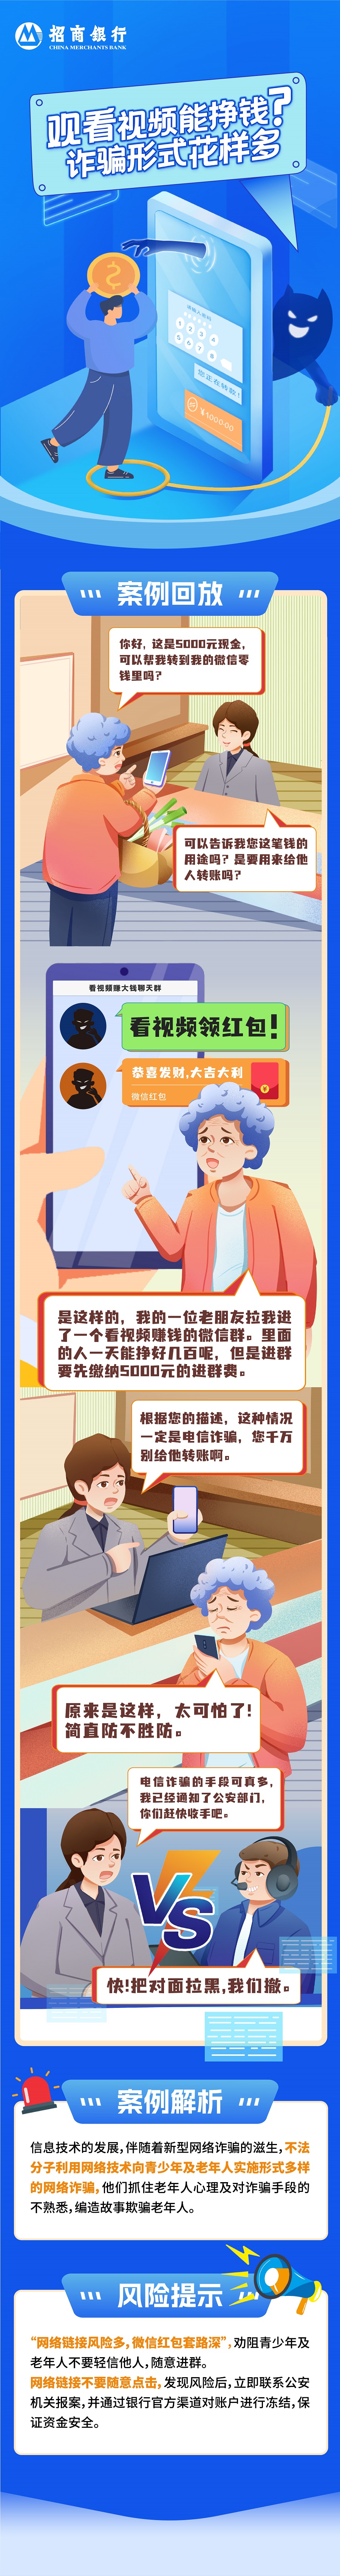  Tianjin can earn money by watching videos _ How long are fraud forms? Jpg